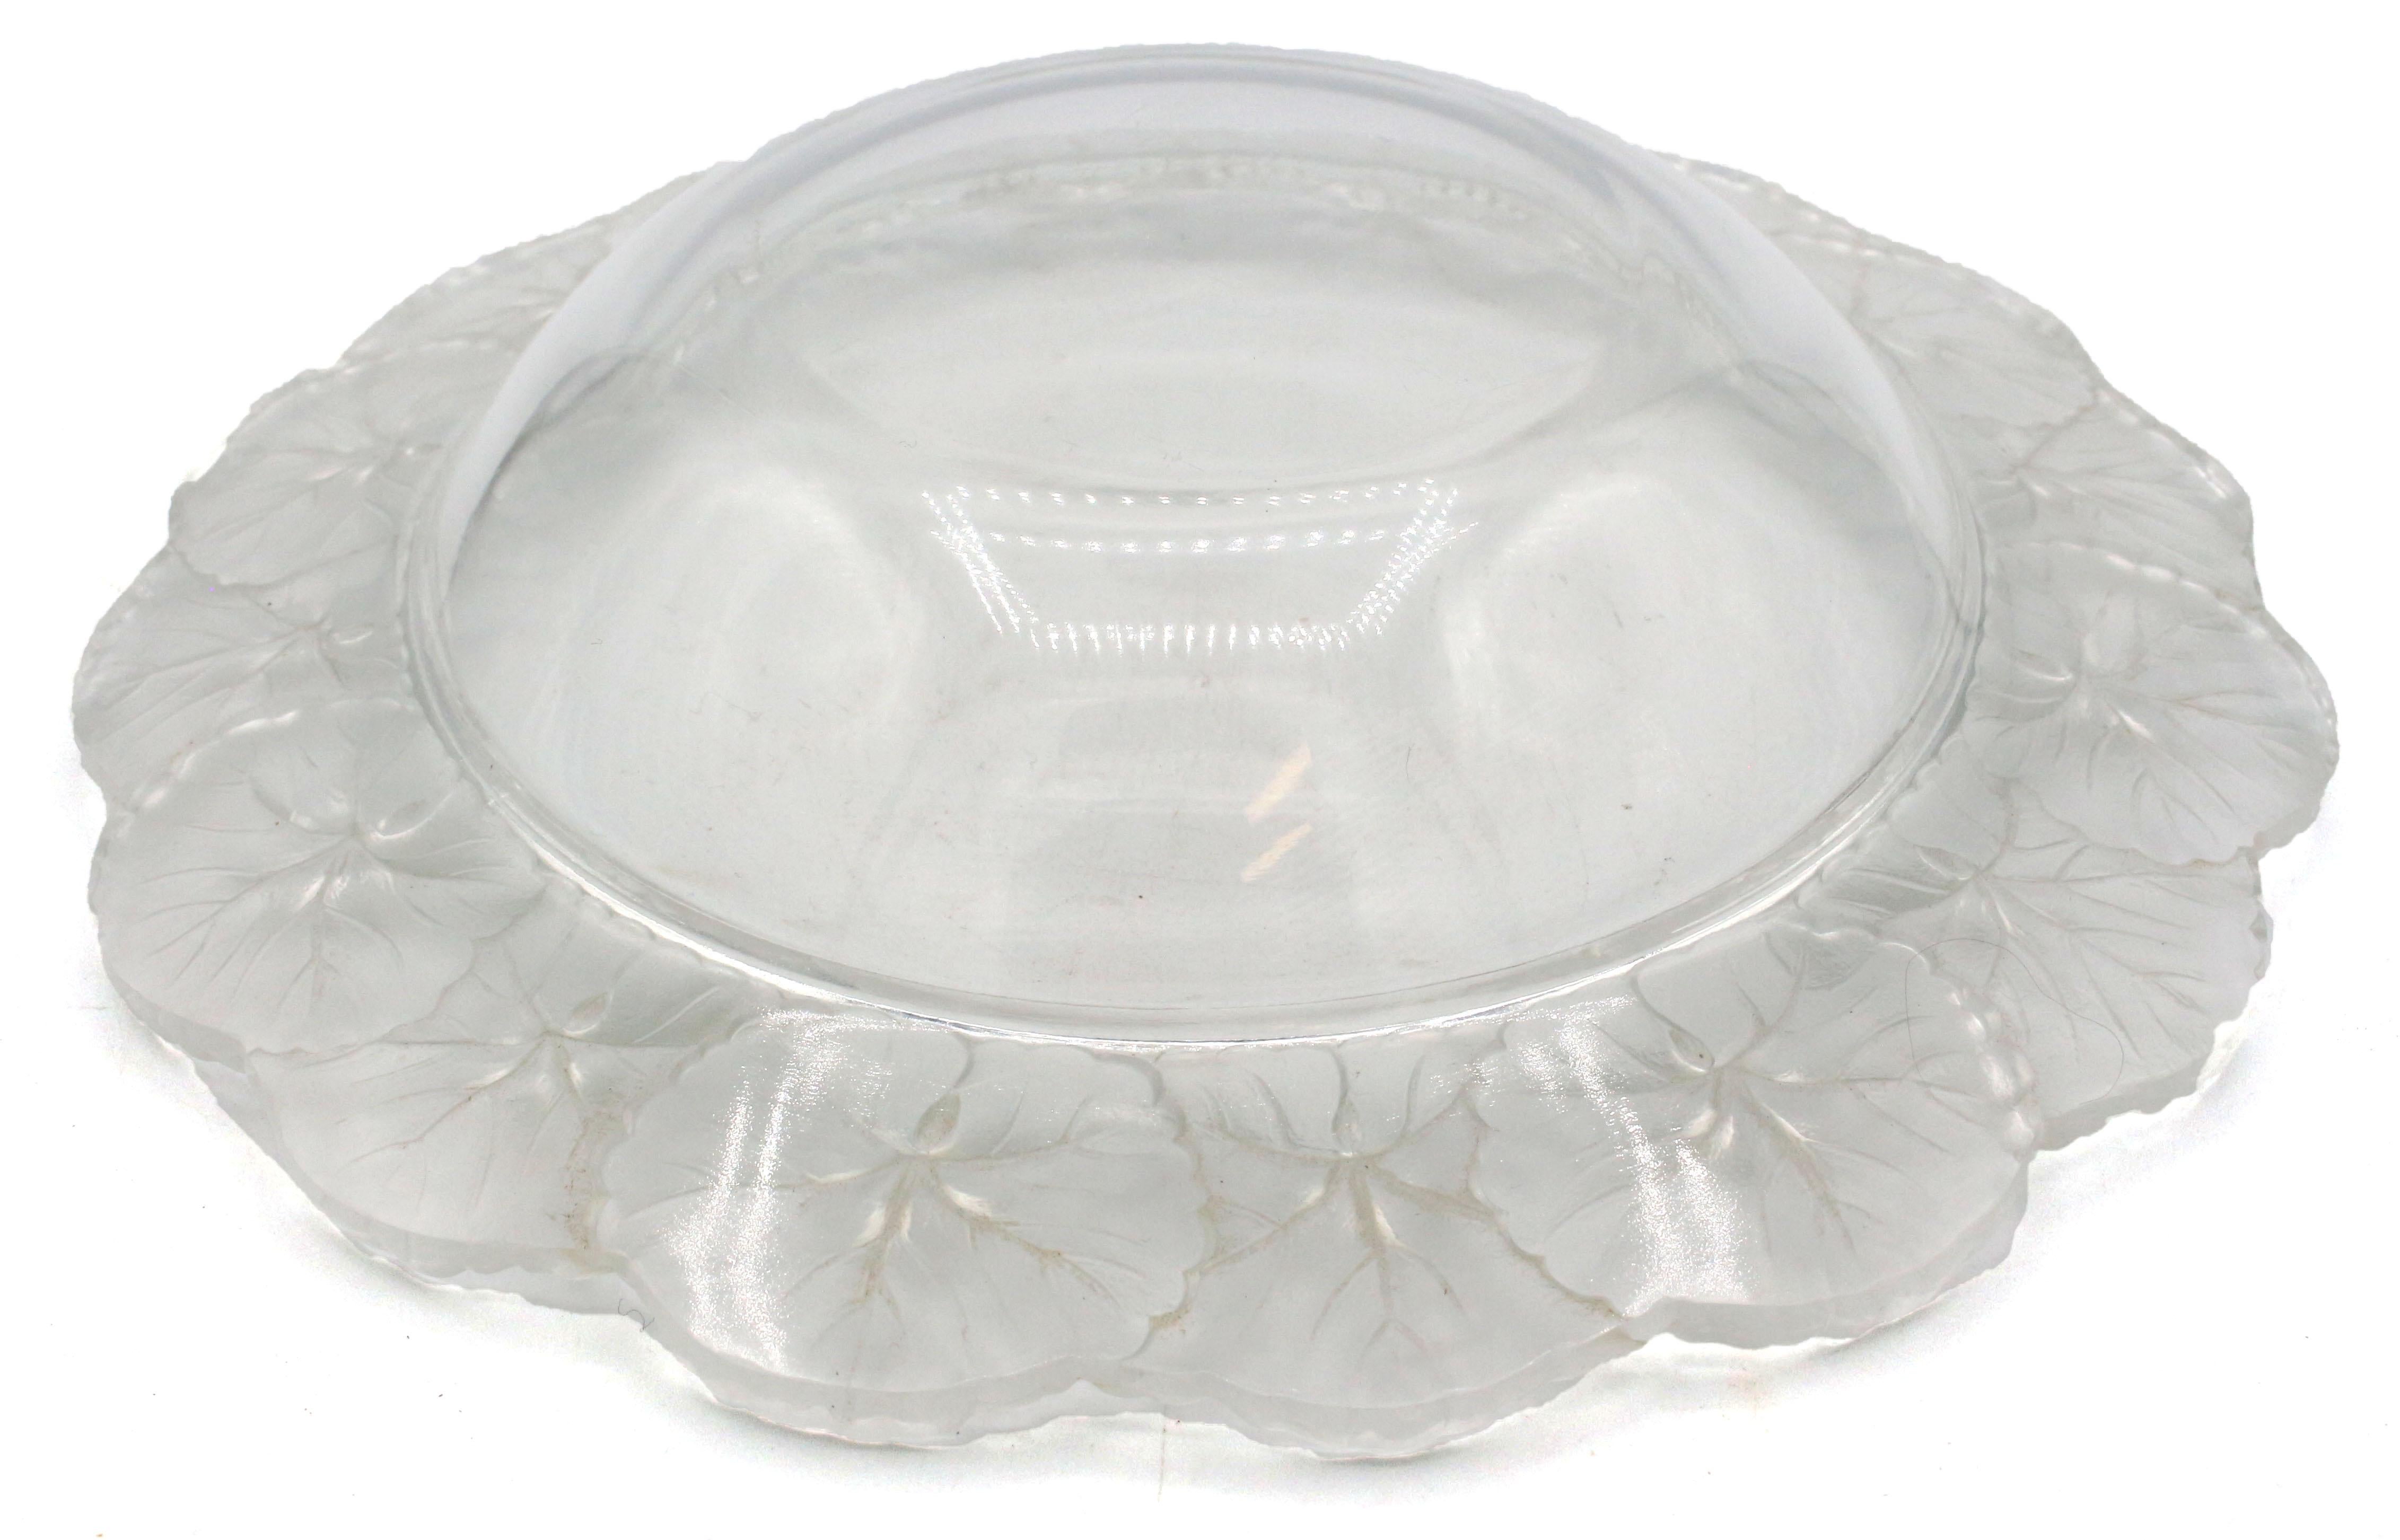 Lalique Honfleur crystal bowl, France, mid-20th century. The geranium border rim in frosted glass to clear glass central bowl.
10.75